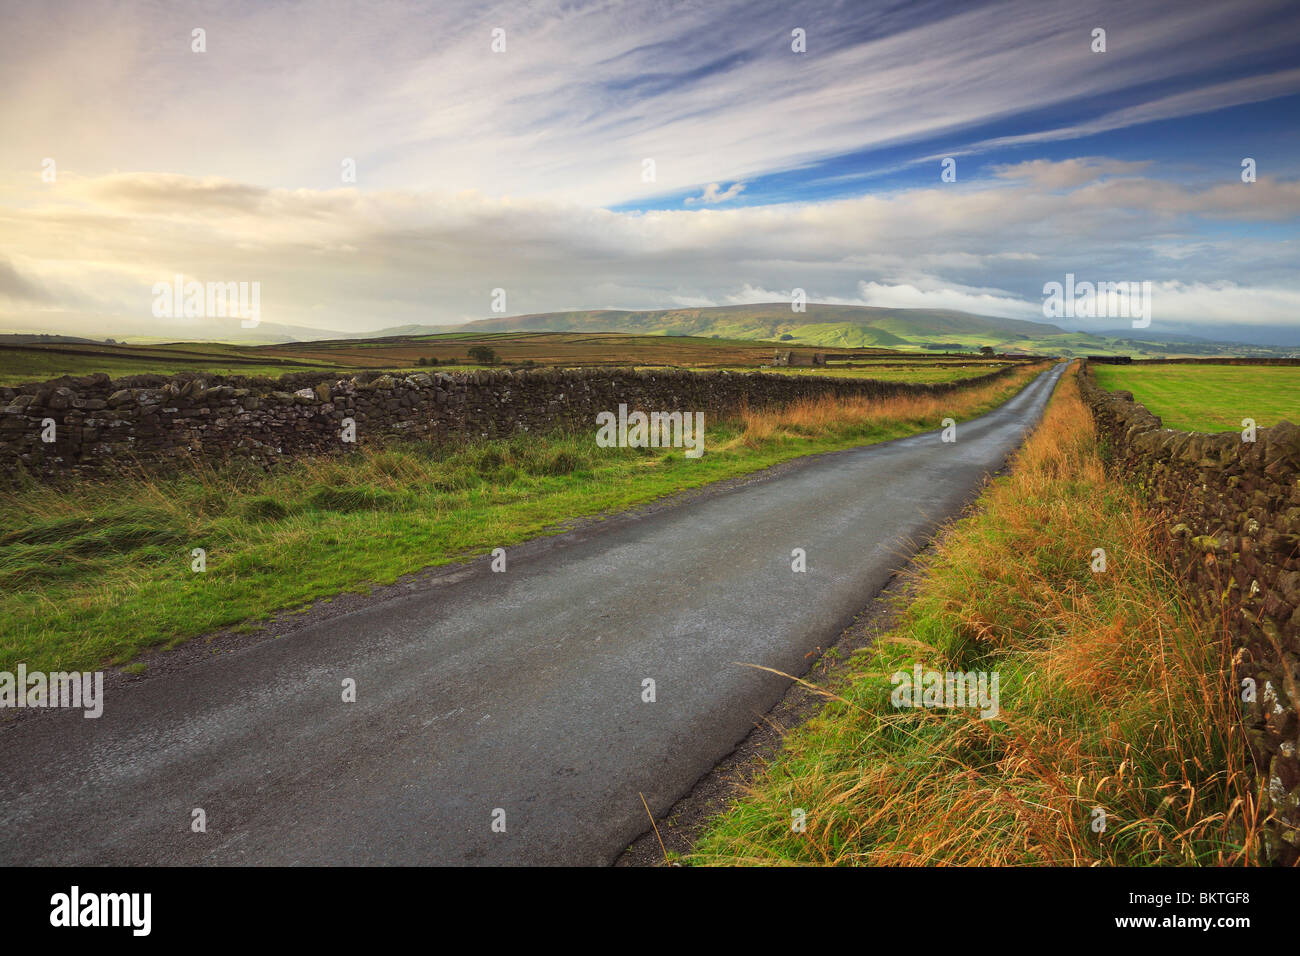 The open space & sky of the Yorkshire Dales as seen from near Grassington on a breezy summer morning Stock Photo